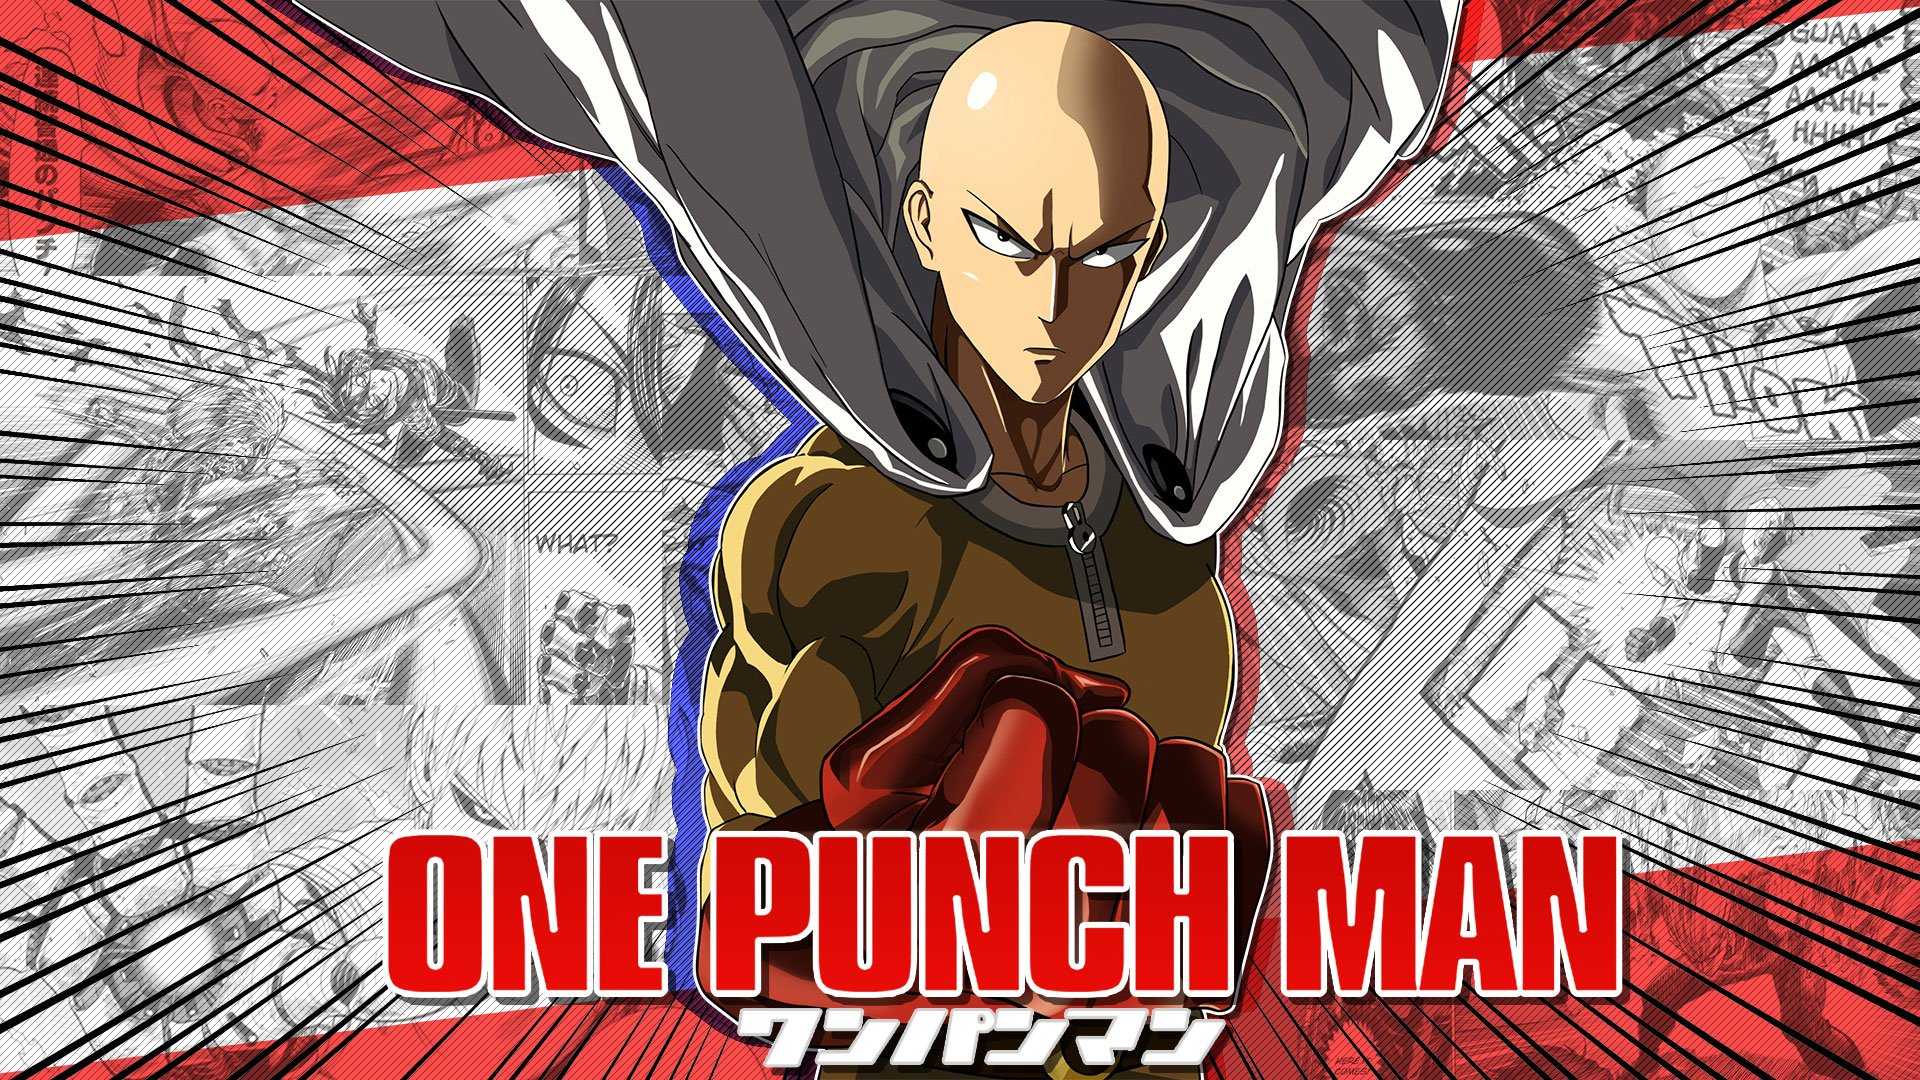 One Punch Man Wallpapers on WallpaperDog